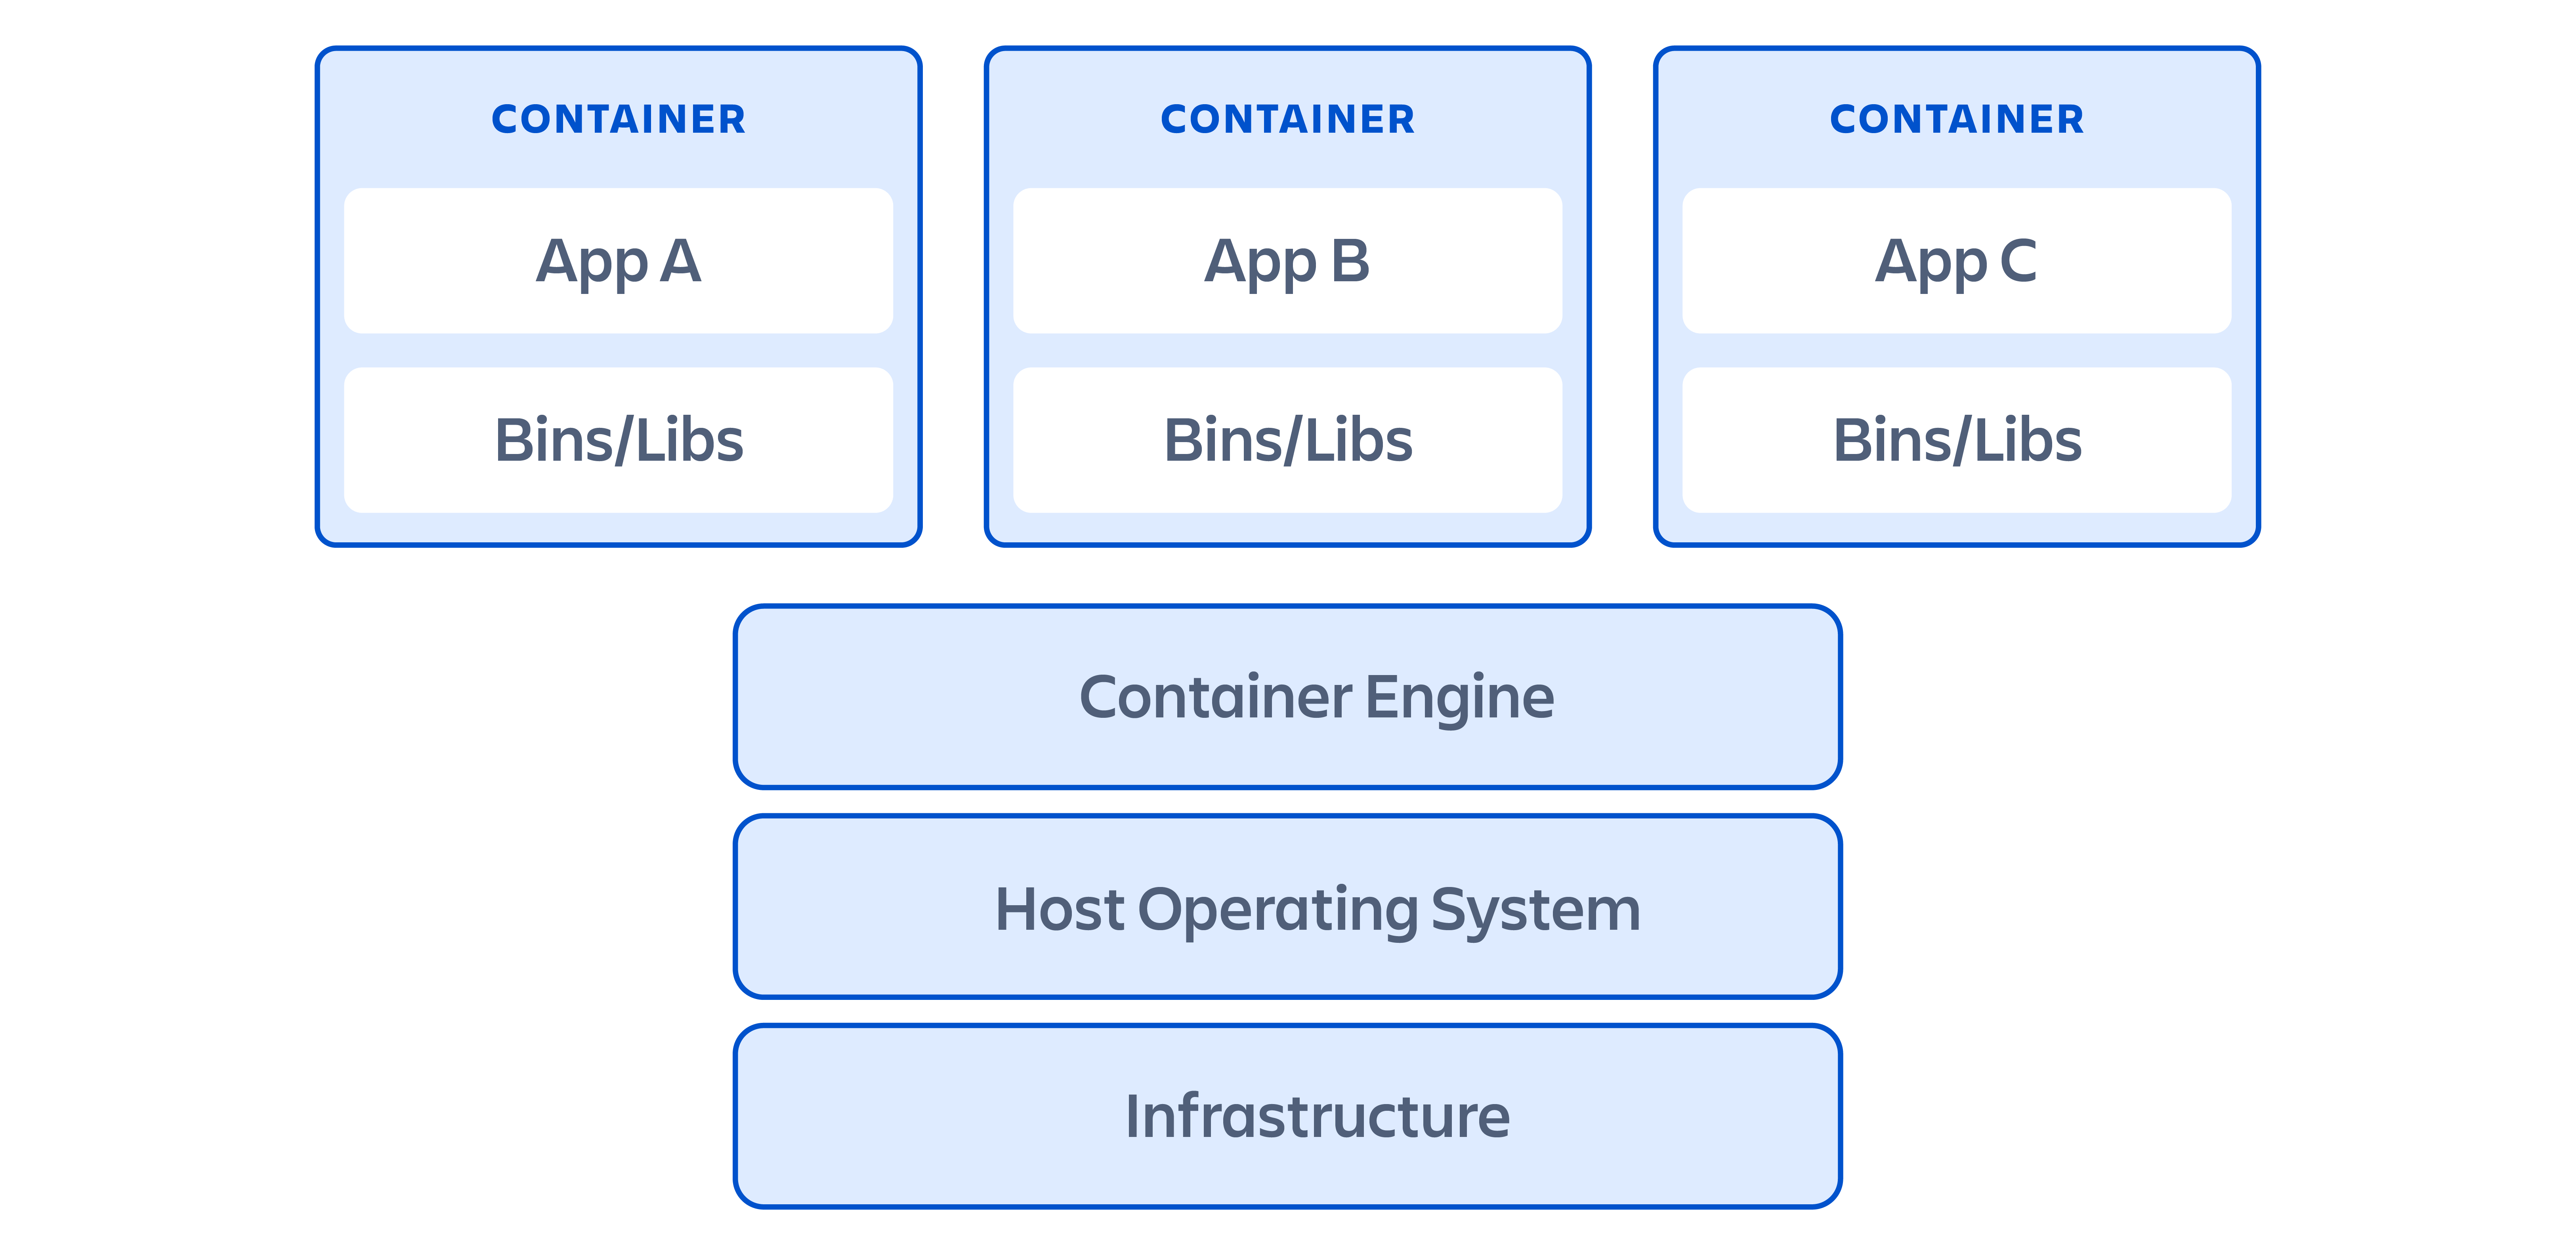 A diagram showing how containers are structured